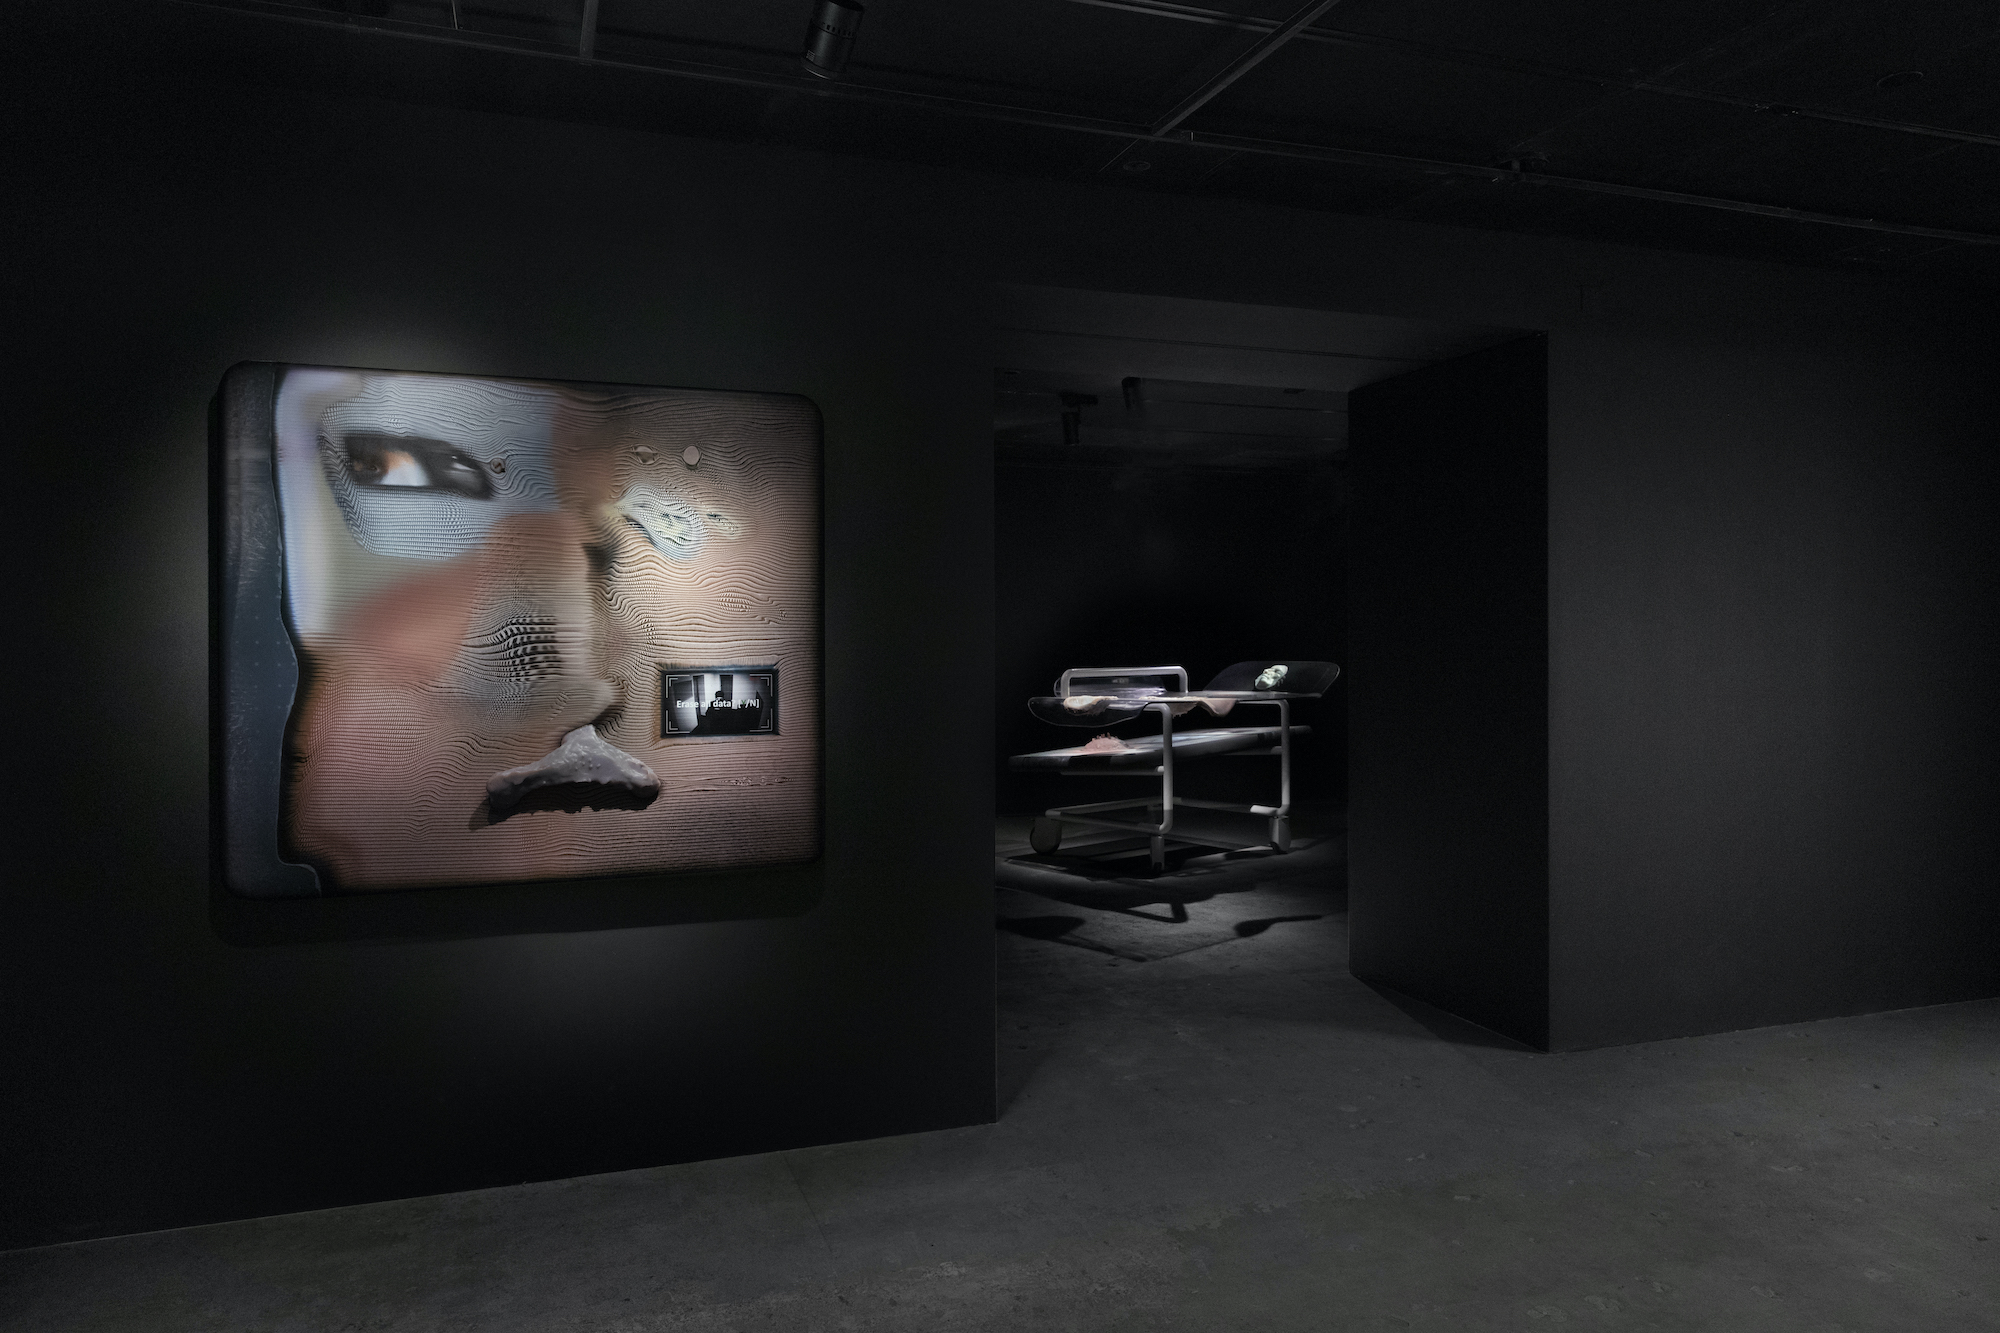 Image of a dark room with black walls and floor featuring a blue and red face-like artwork. Through a doorway is a spotlighted metal cart.